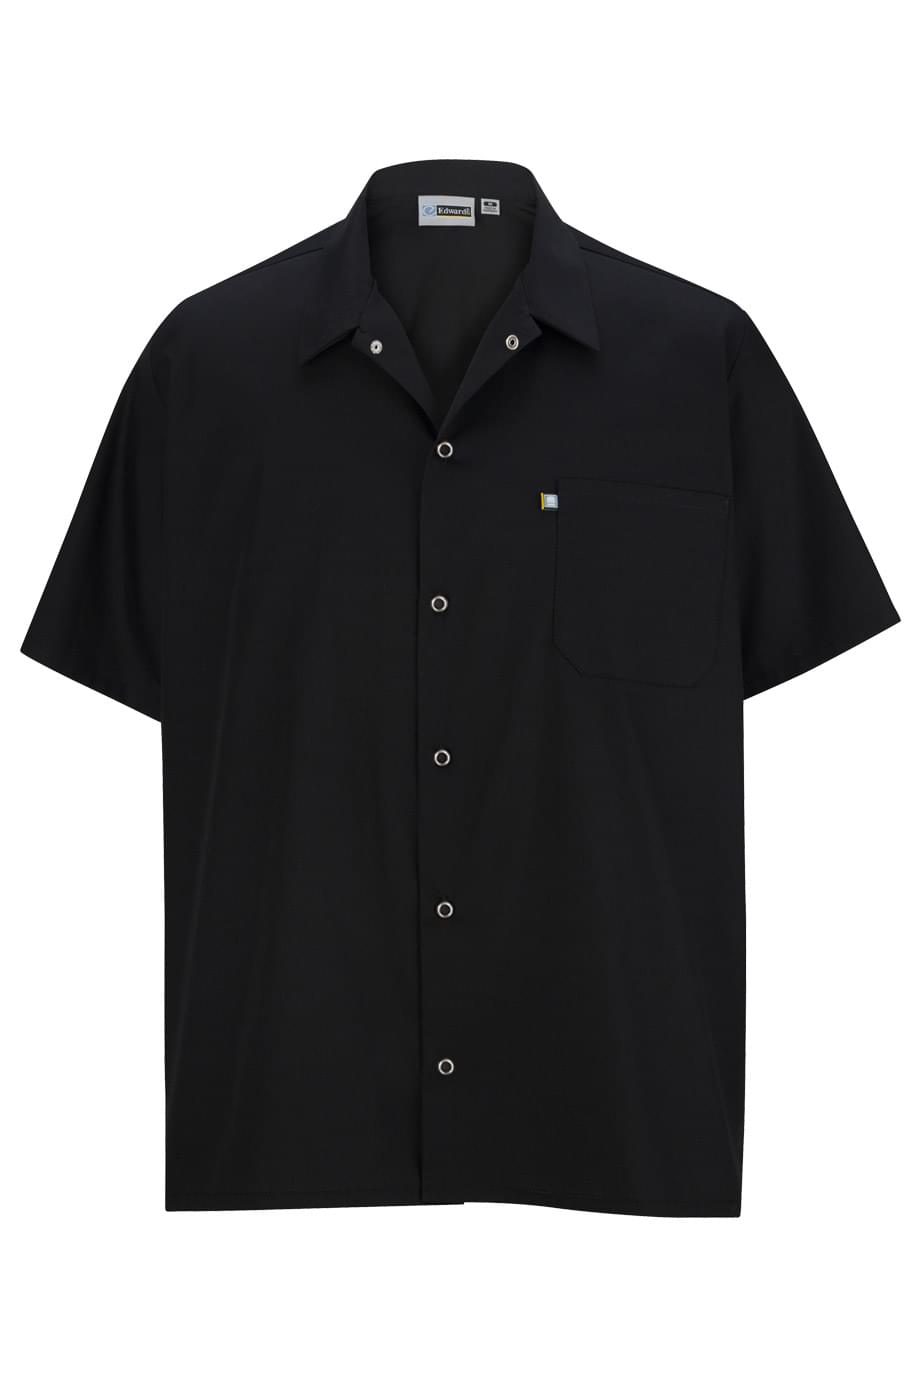 COOK SHIRT WITH SNAP CLOSURE